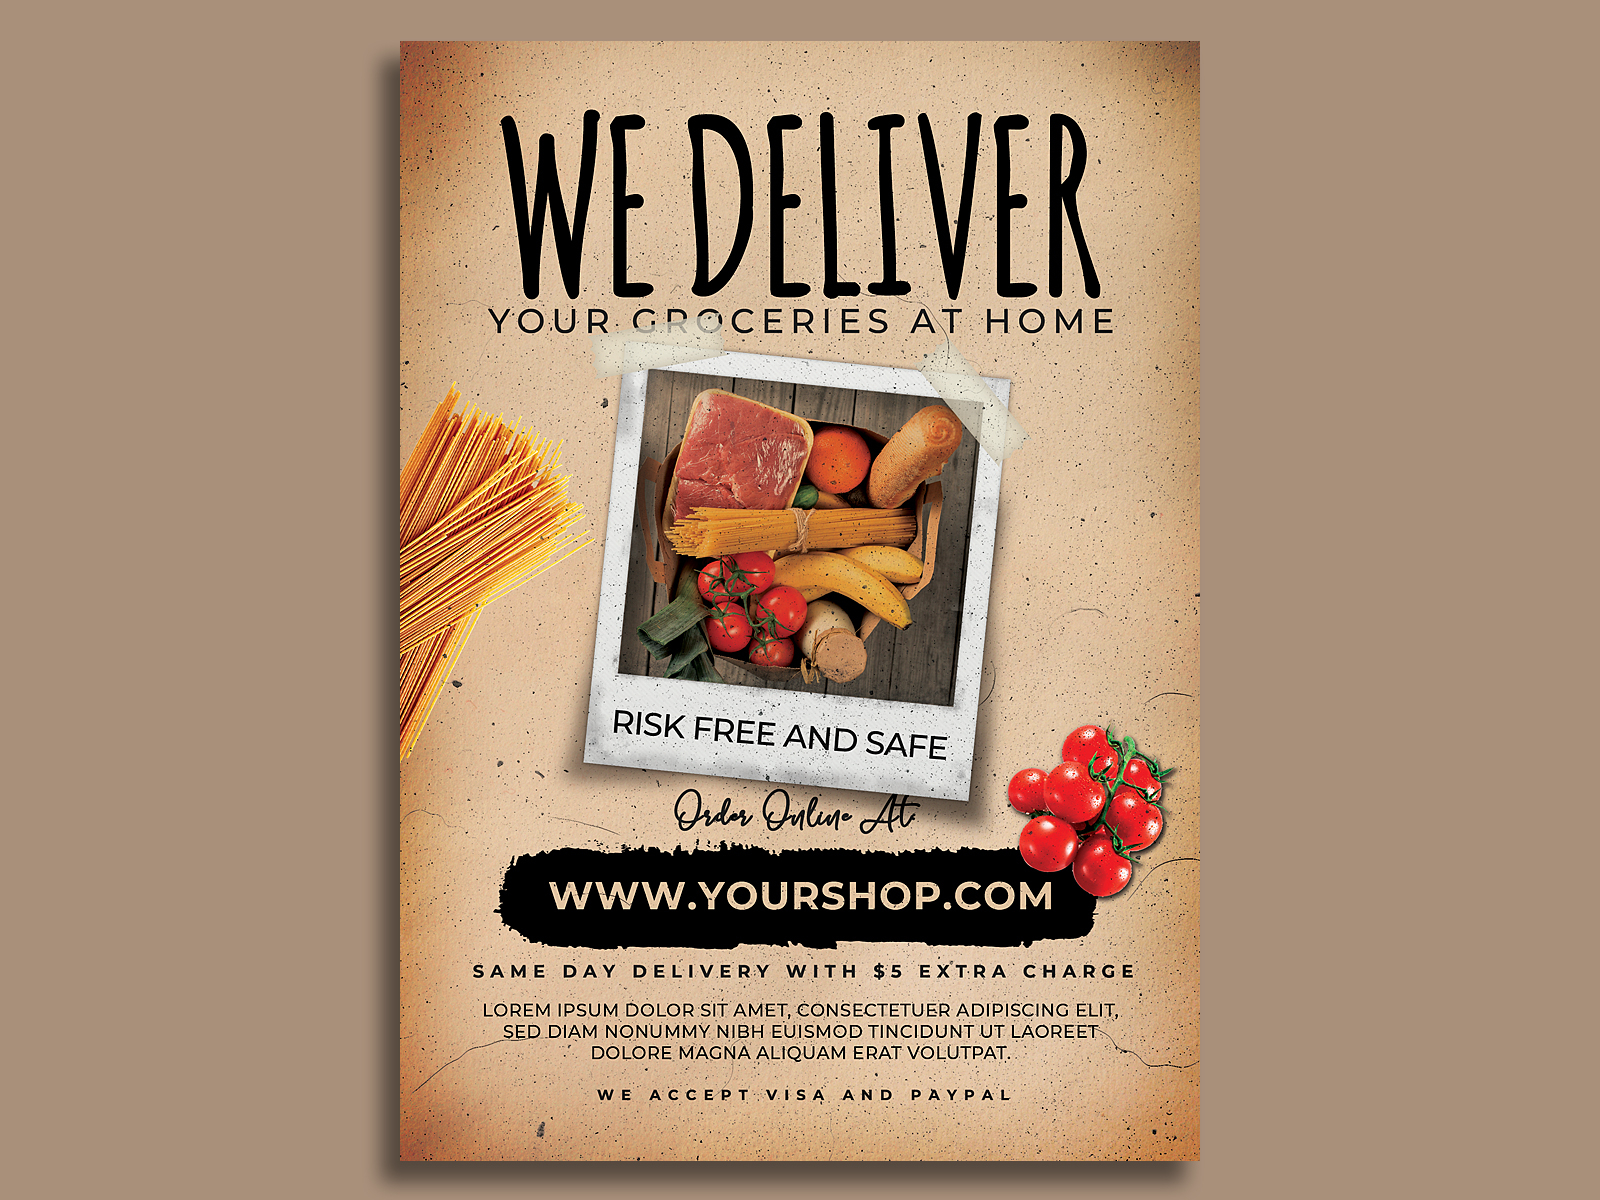 Supermarket Groceries Delivery Flyer Template by Hotpin on Dribbble Regarding Delivery Flyer Template